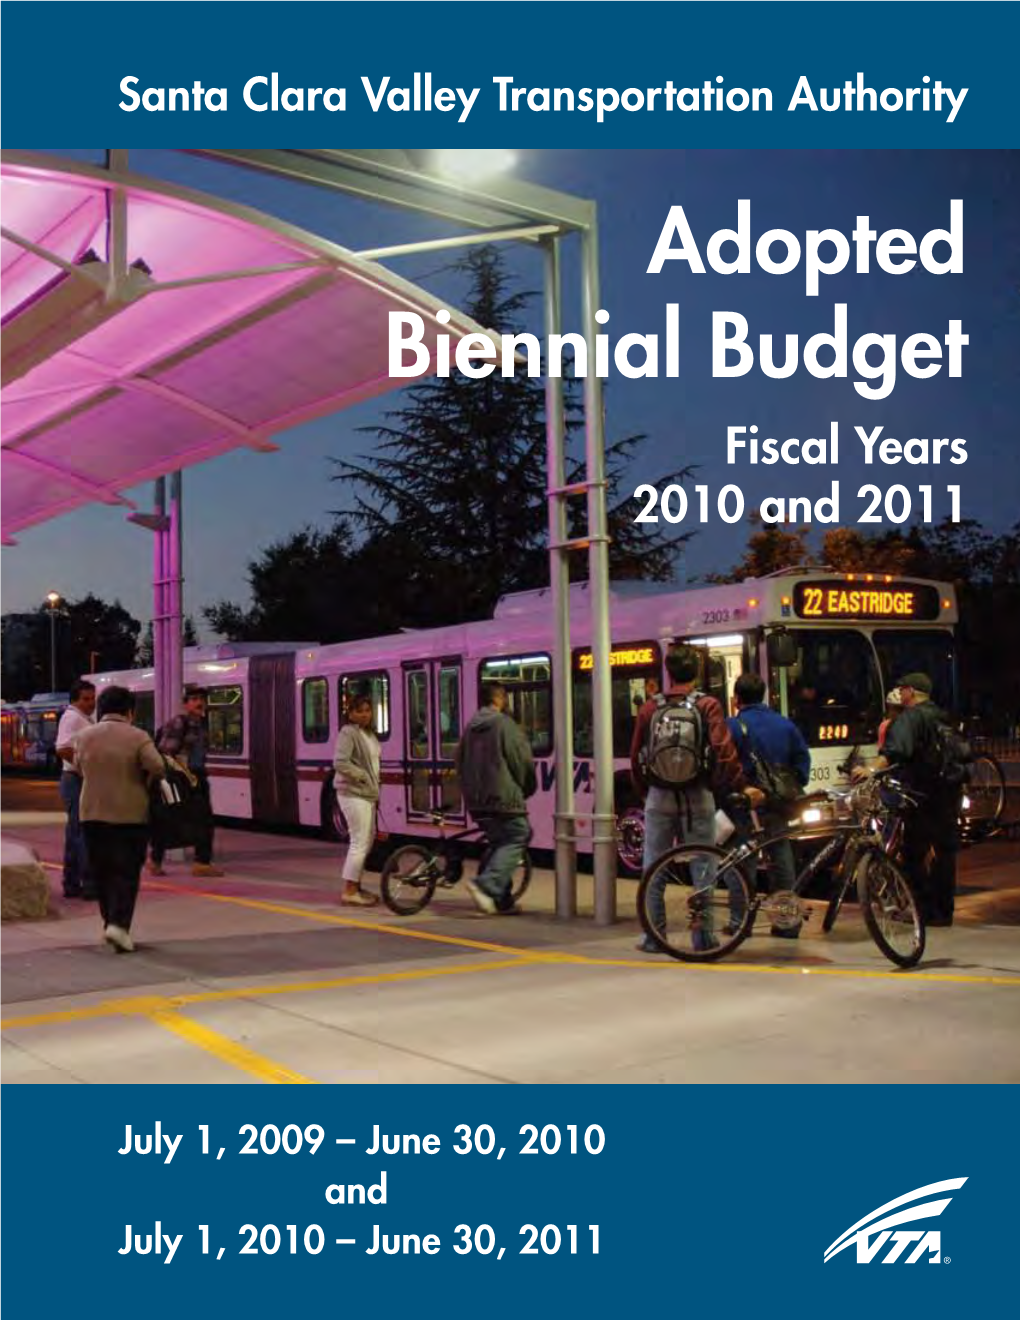 Adopted Biennial Budget Fiscal Years 2010 and 2011